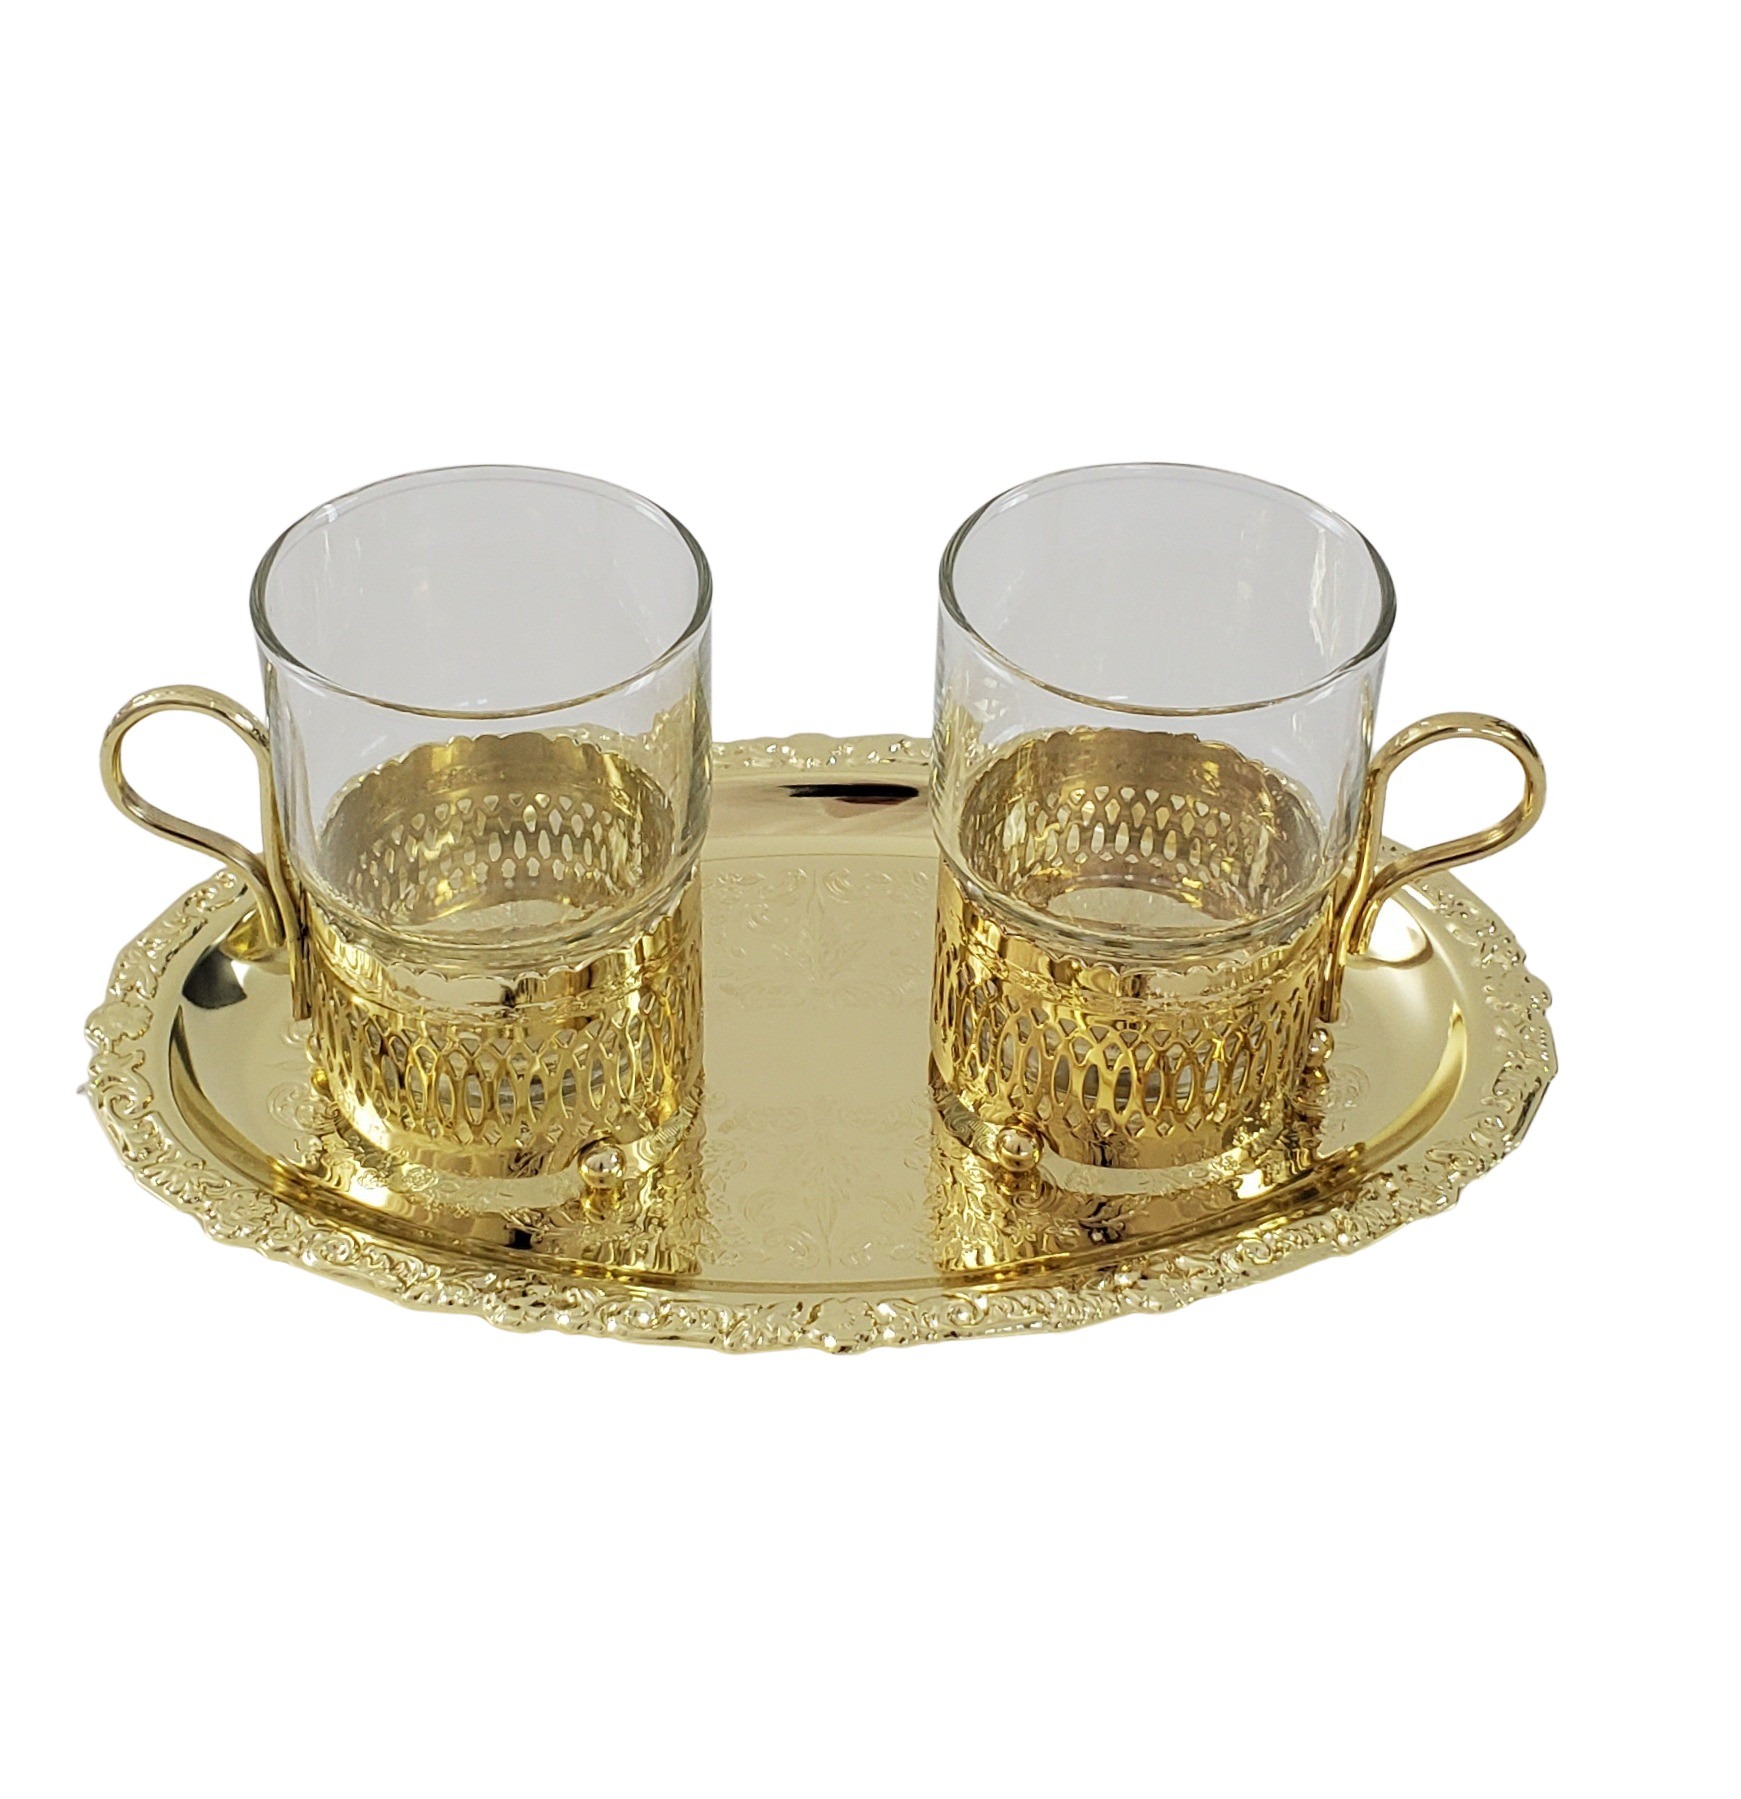 55mm & 65mm Glass Cup Set of 2